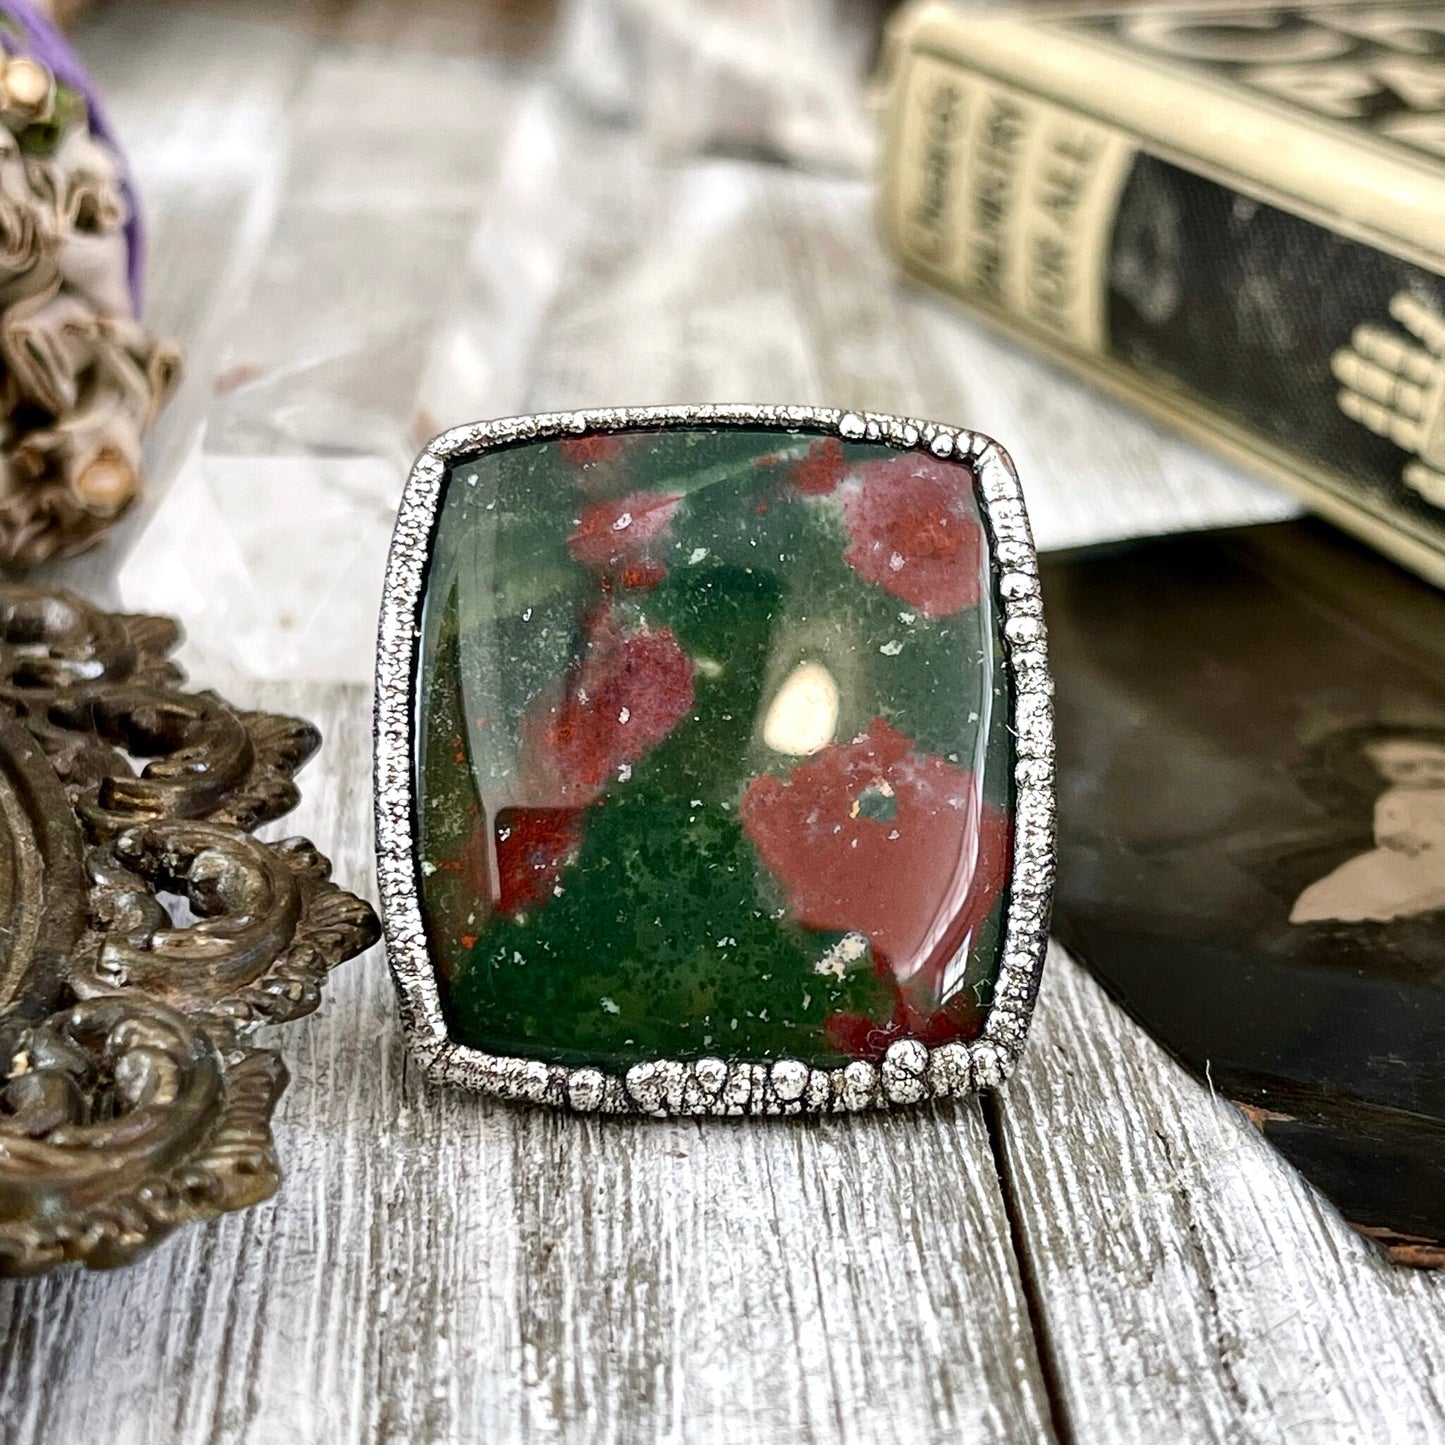 Big Size 11 Natural Bloodstone Statement Ring In Fine Silver / Foxlark Collection - One of a Kind